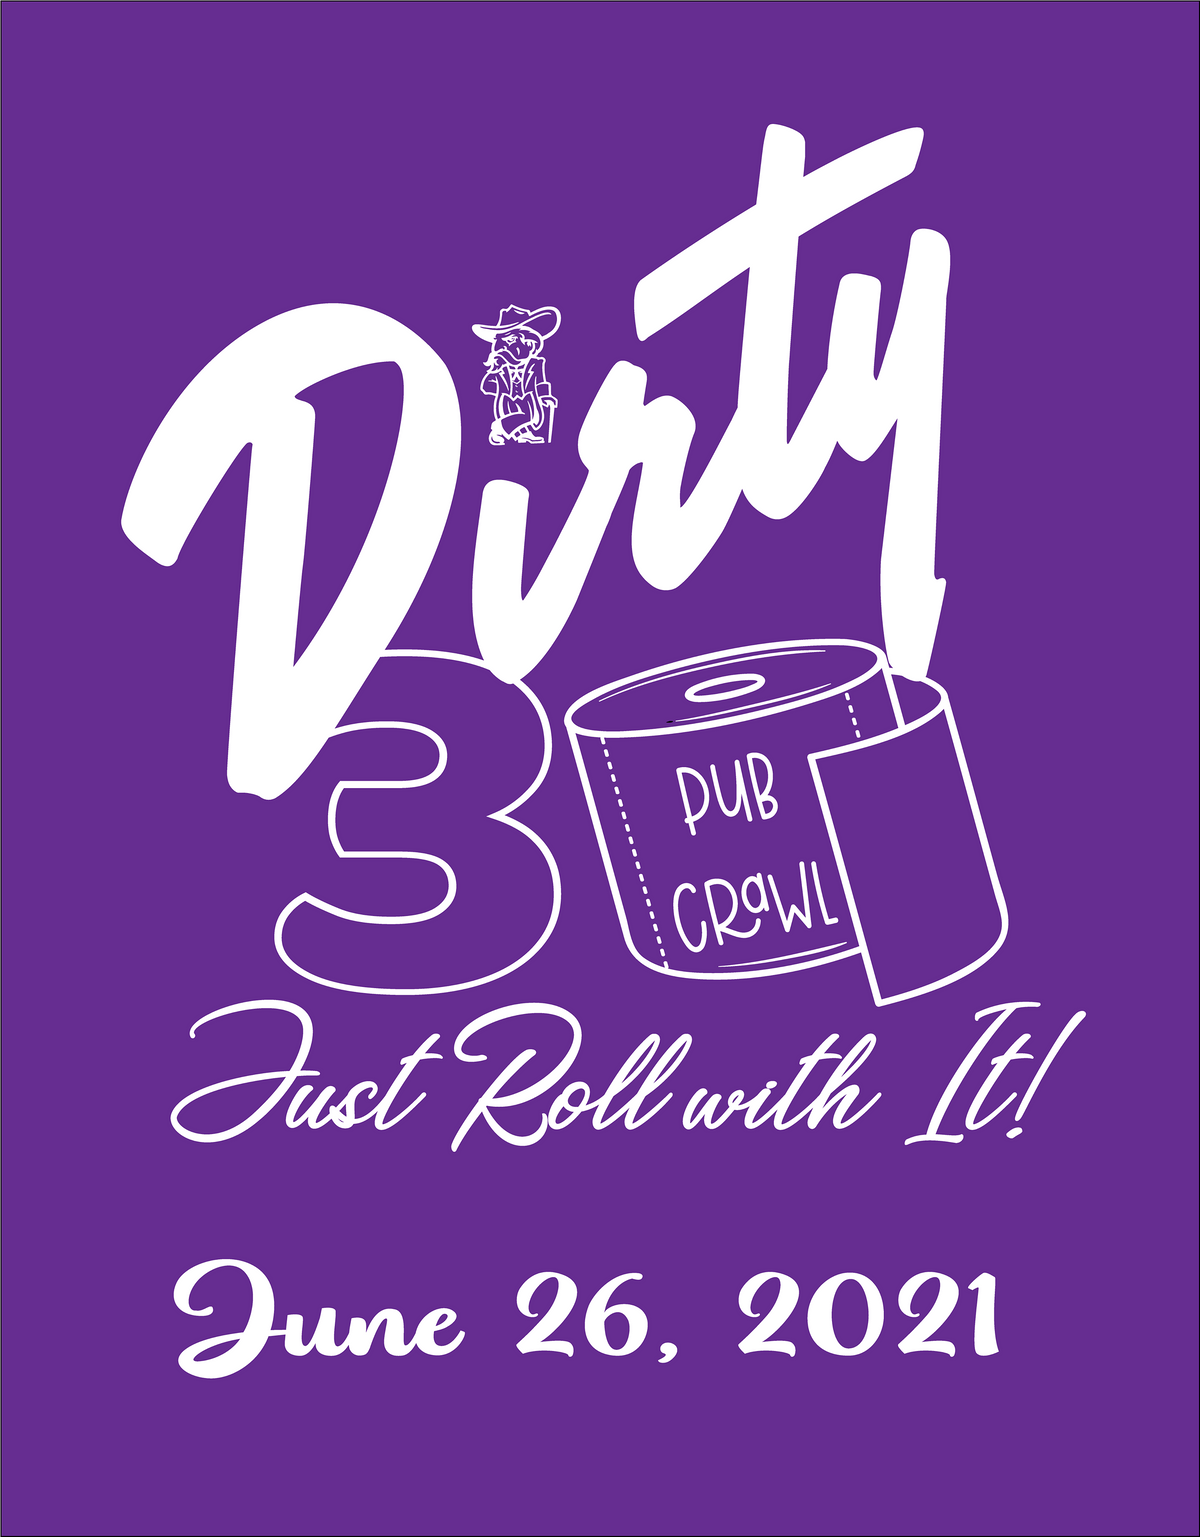 FSH Class of 1990 Dirty 30 Pub Crawl - Just Roll with It!